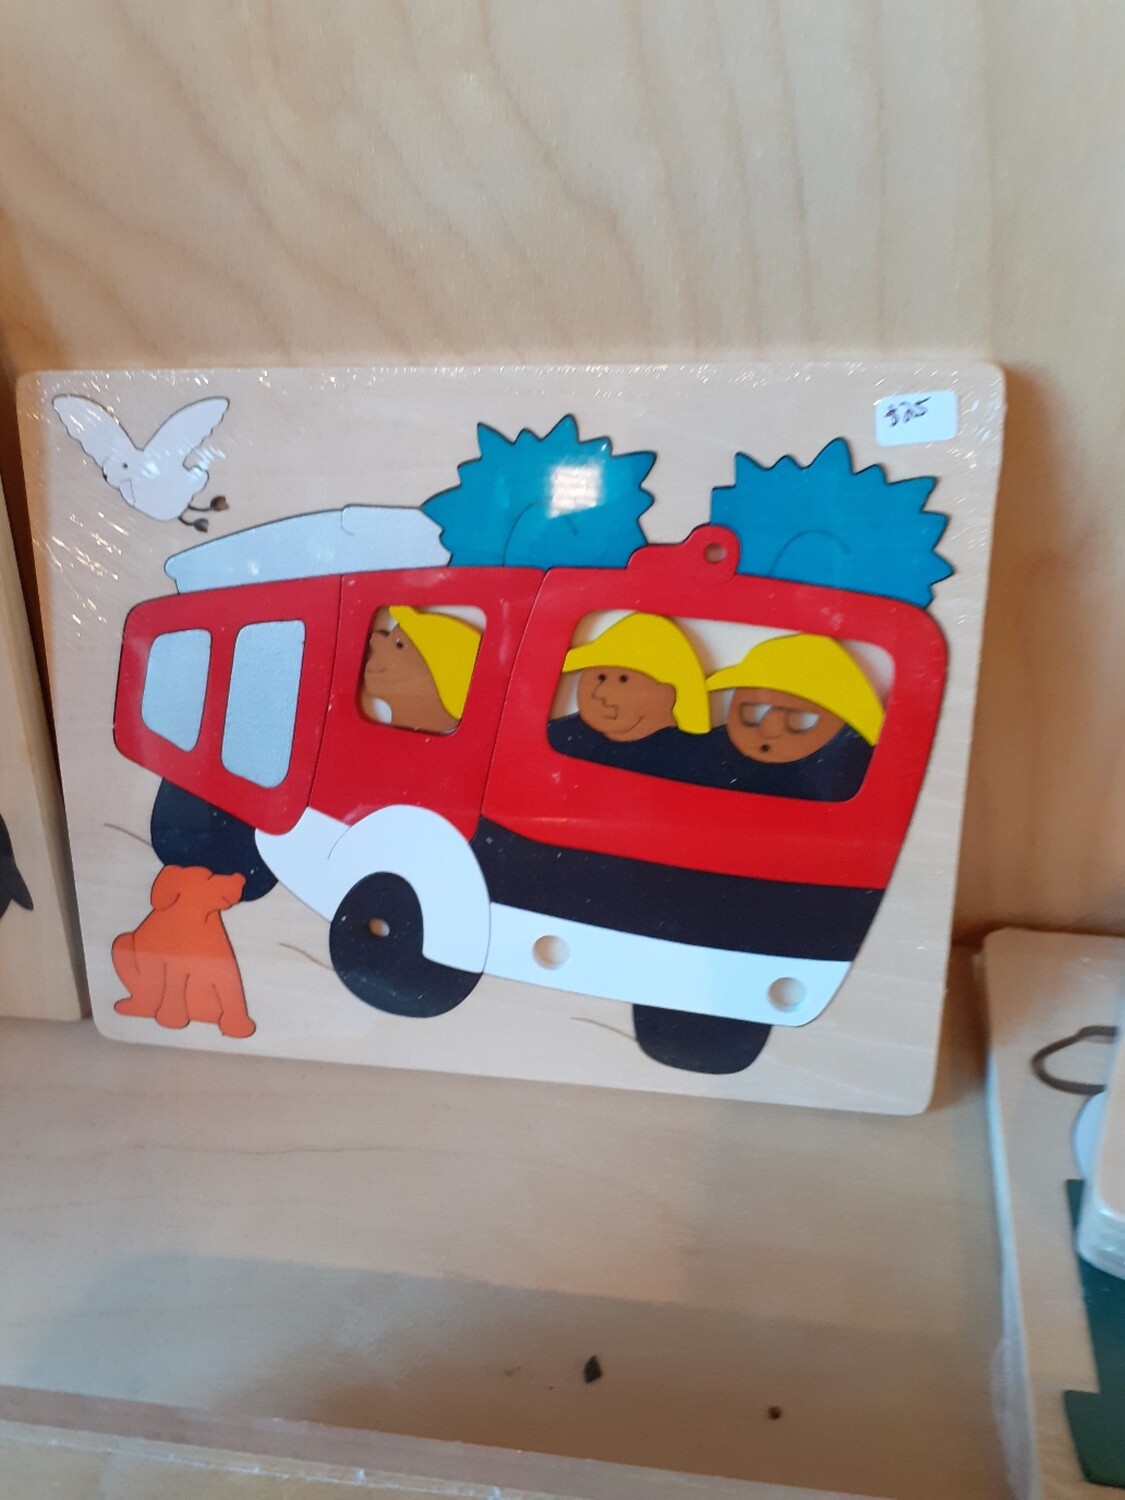 Jigsaw fire engine wooden puzzle